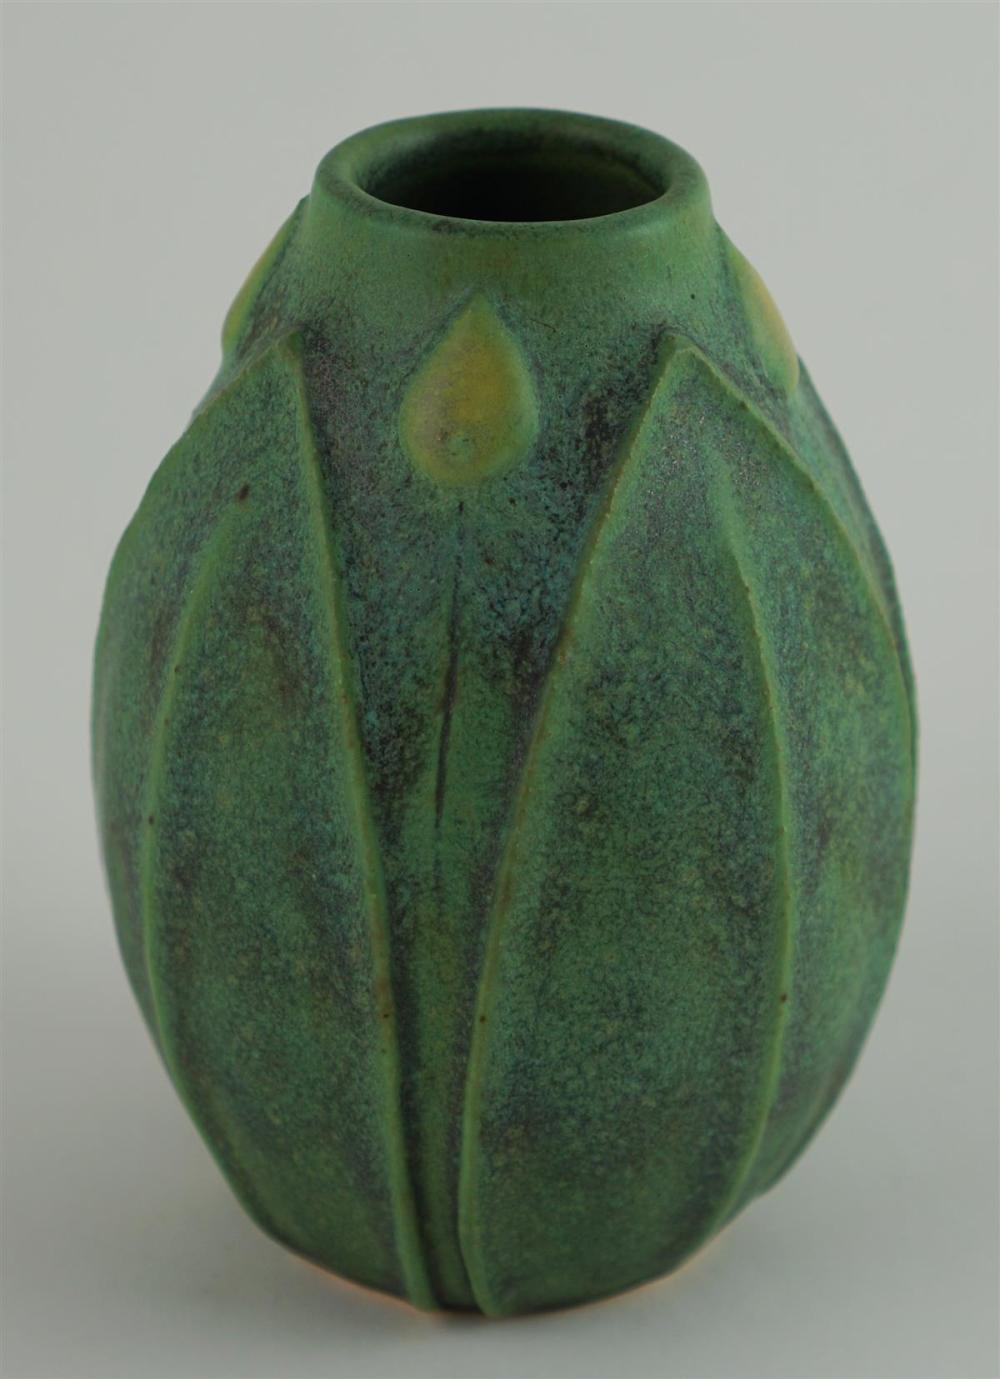 SMALL ART POTTERY GREEN AND YELLOW 312567